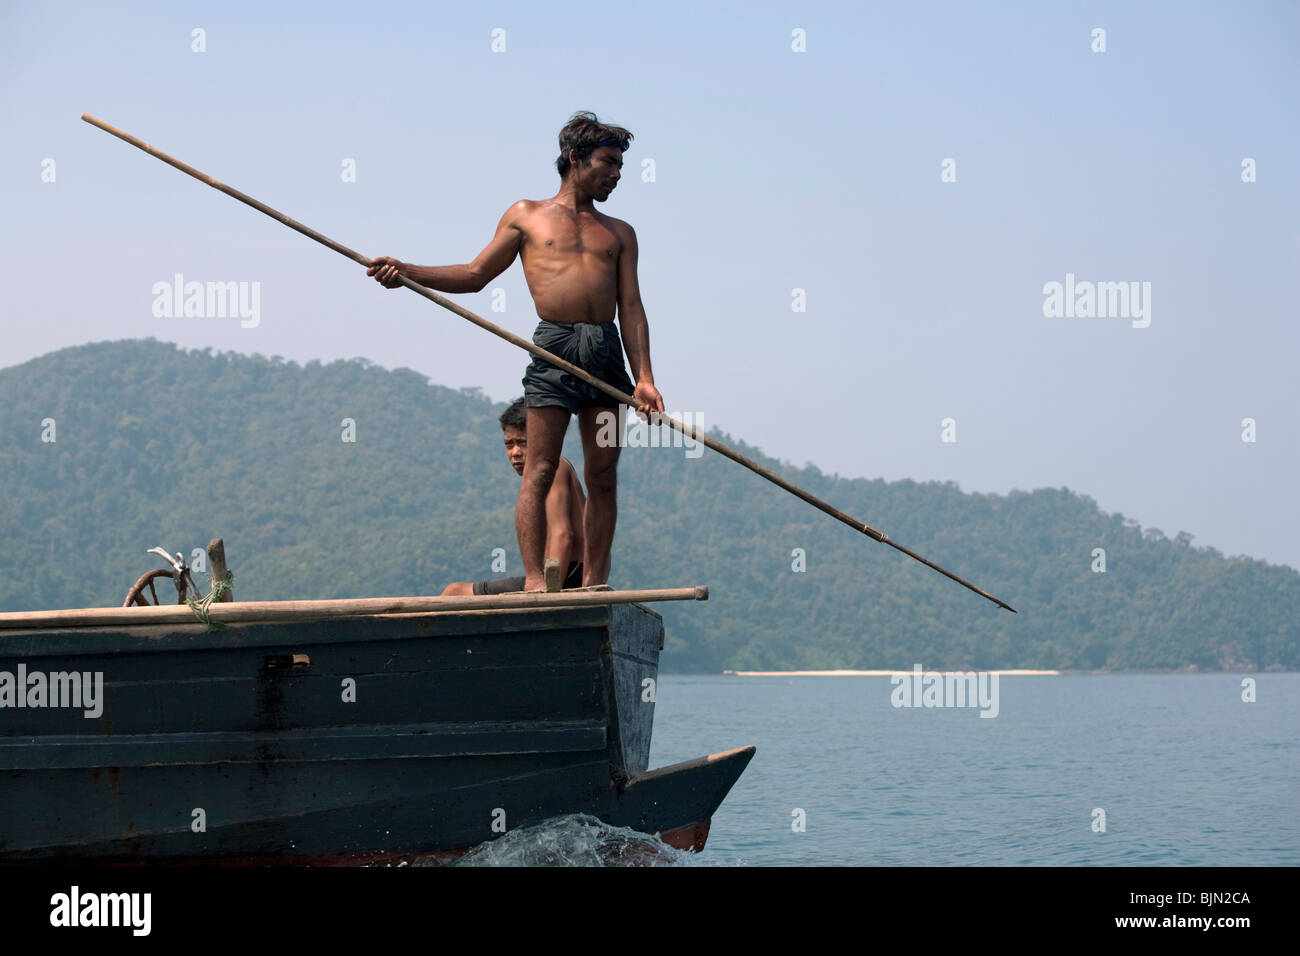 Myanmar sea-gypsies, the nomadic hunter-gatherers of South East Asia harpooning in the traditional way, from a boat prow. Stock Photo